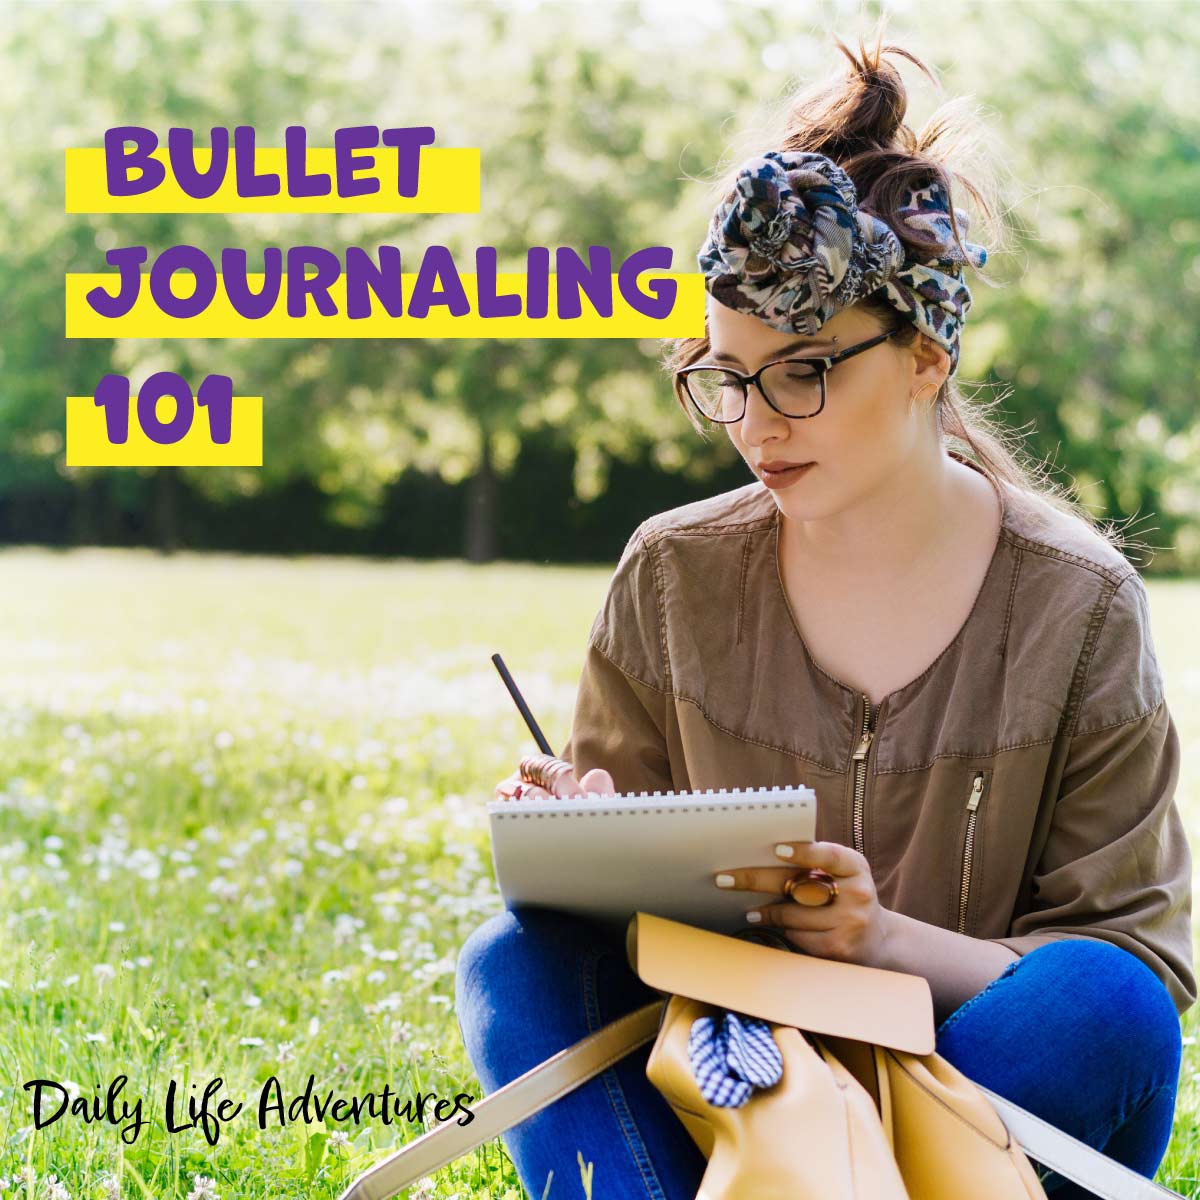 Bullet journaling 101. A girl sitting in a field writing in her notebook.